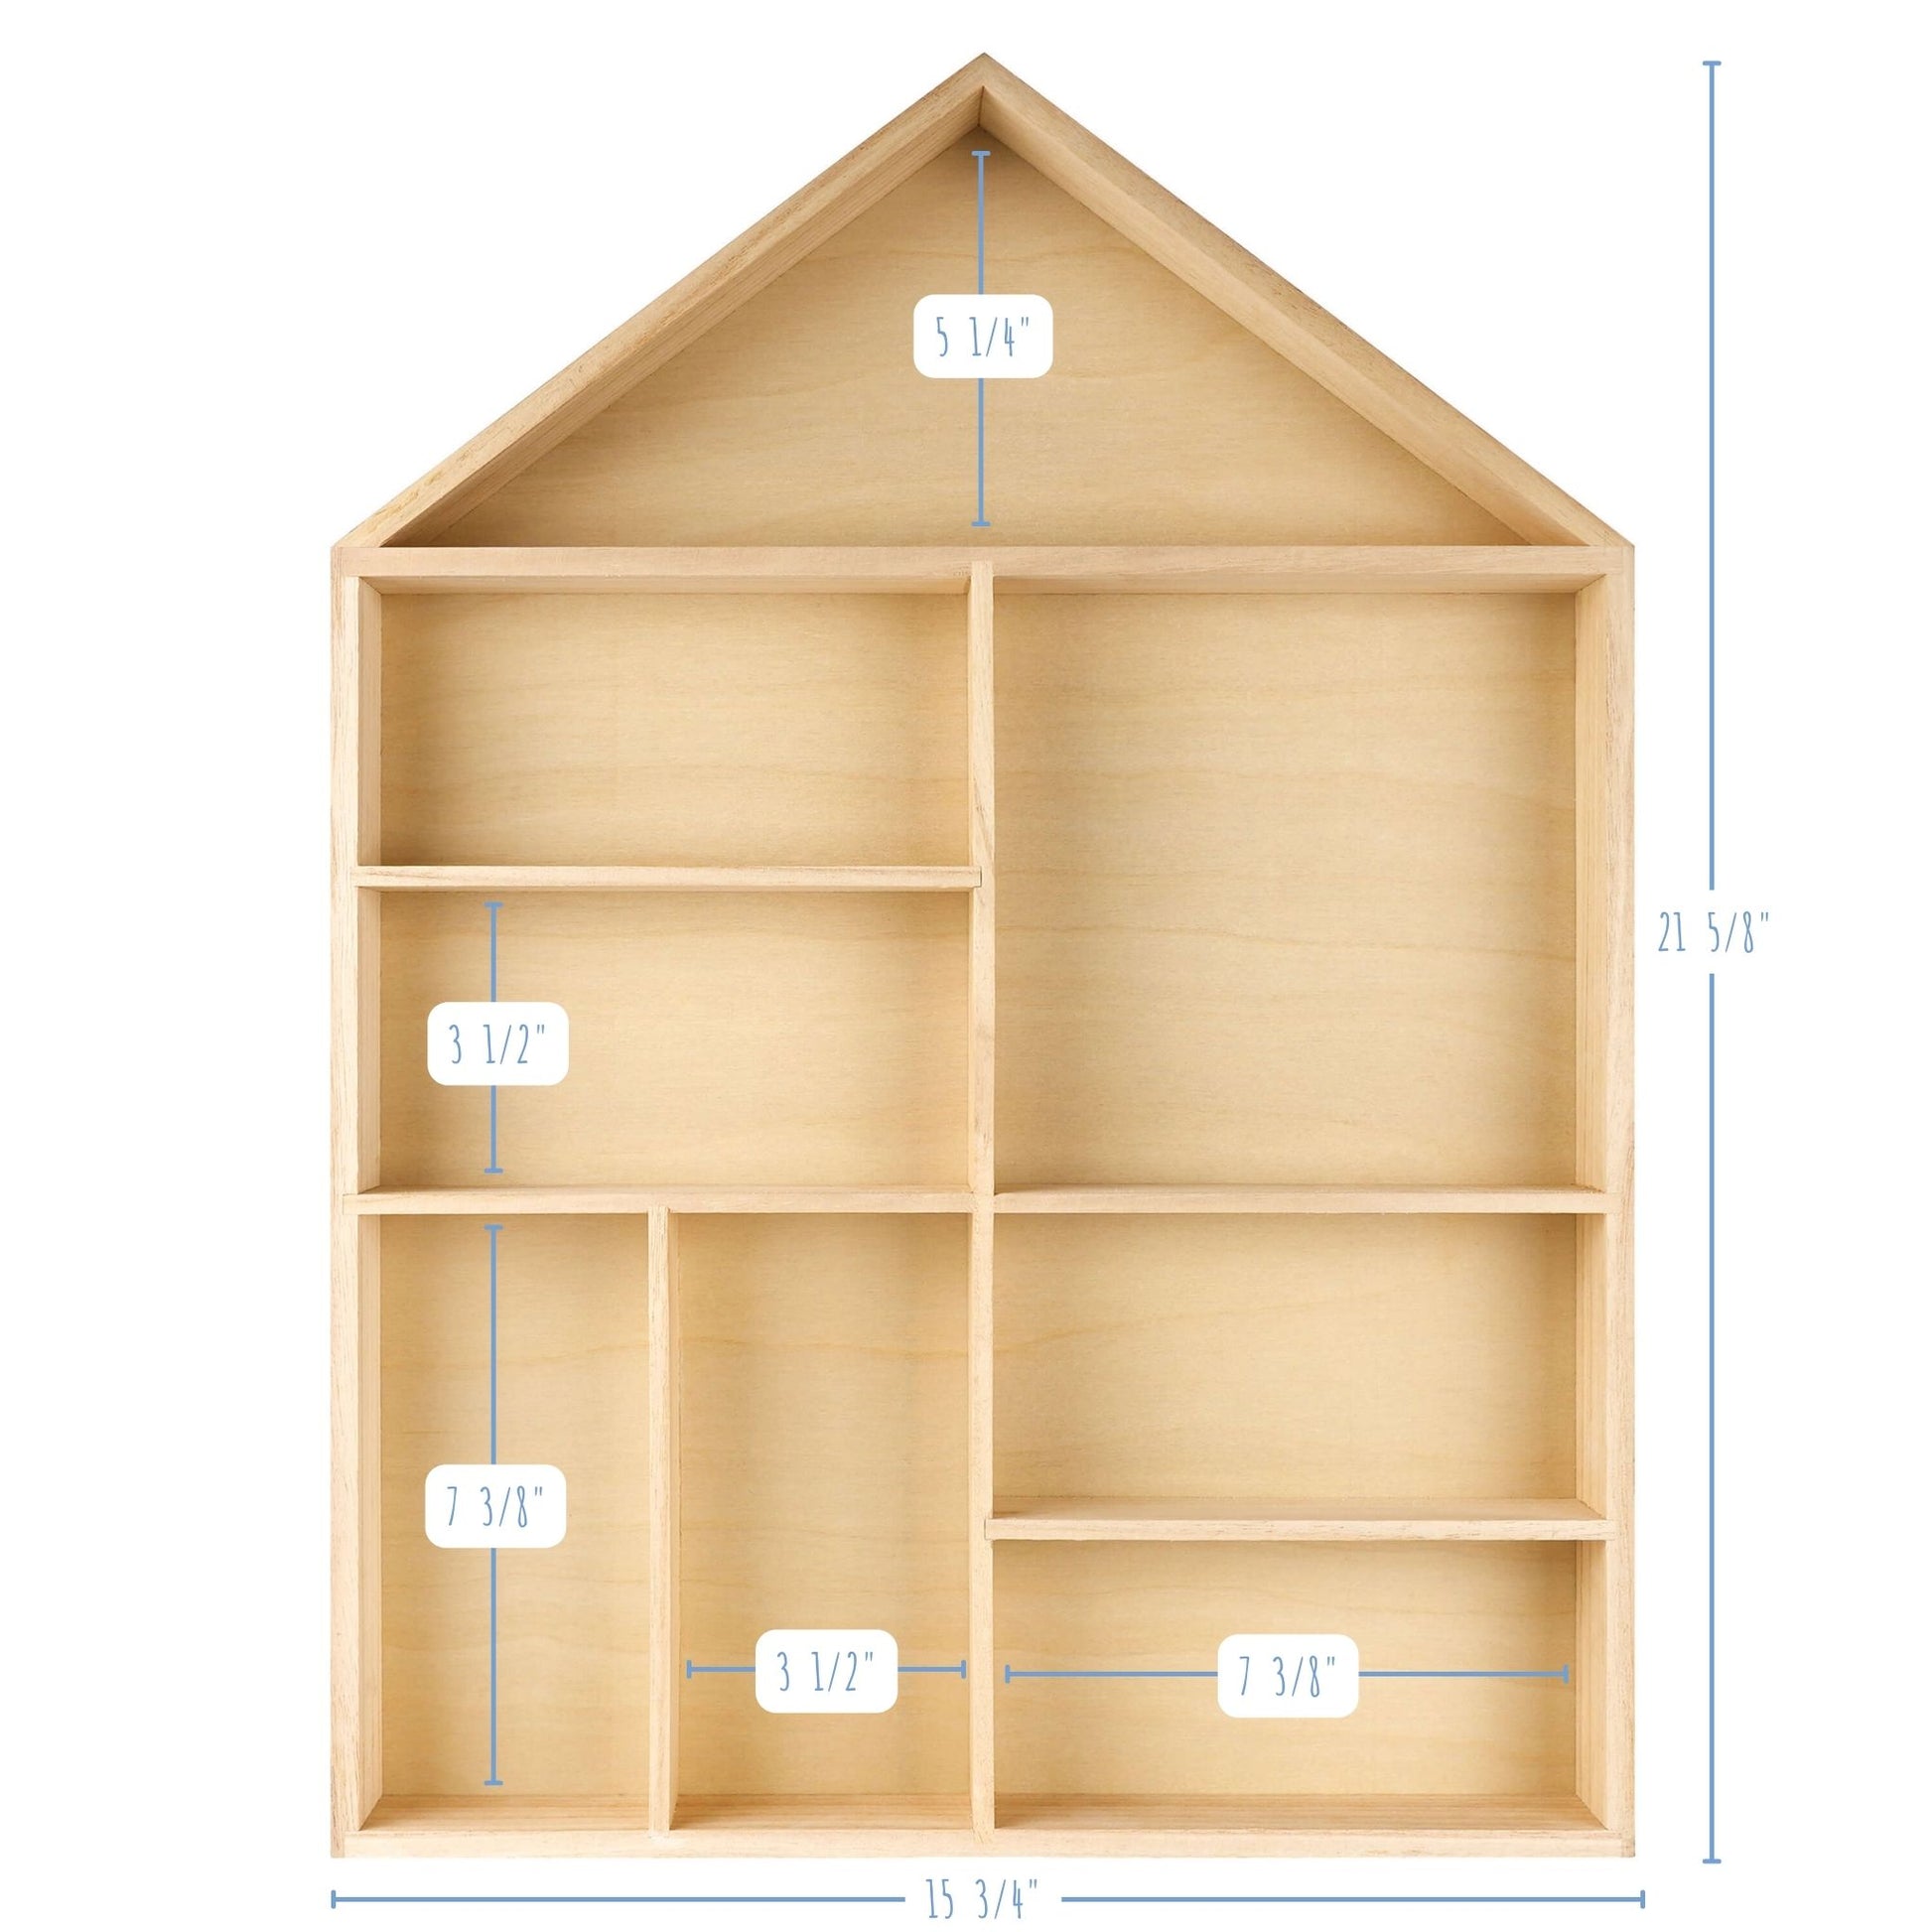 House shaped wooden toy display shelf with a black finish on the outside - with compartments size detailed (front view)